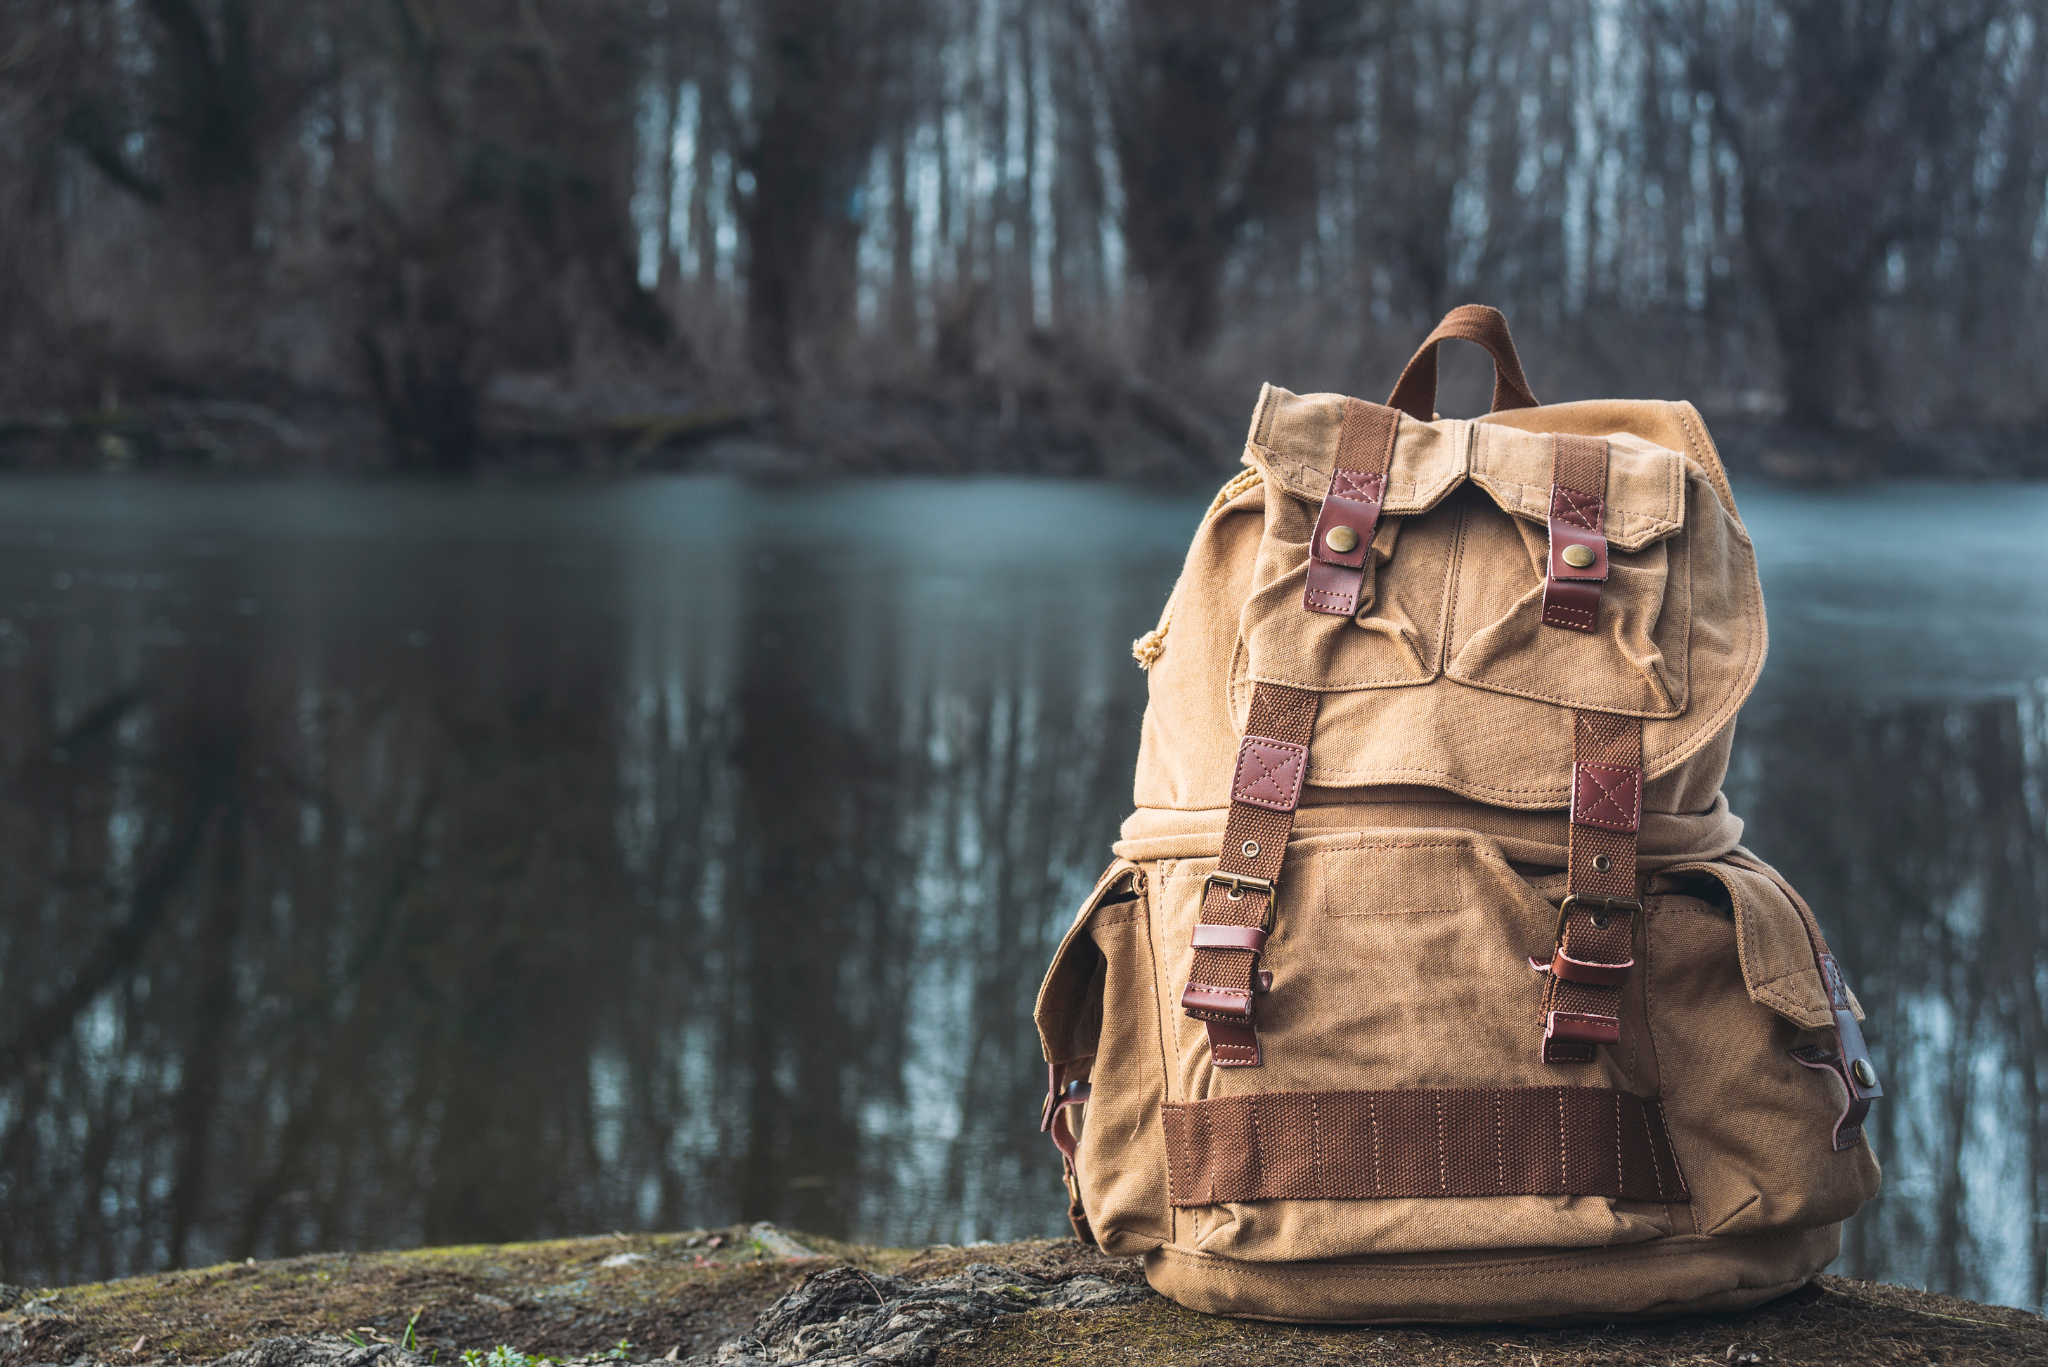 Why You Should Choose Backpacks as Your Niche for Successful Dropshipping